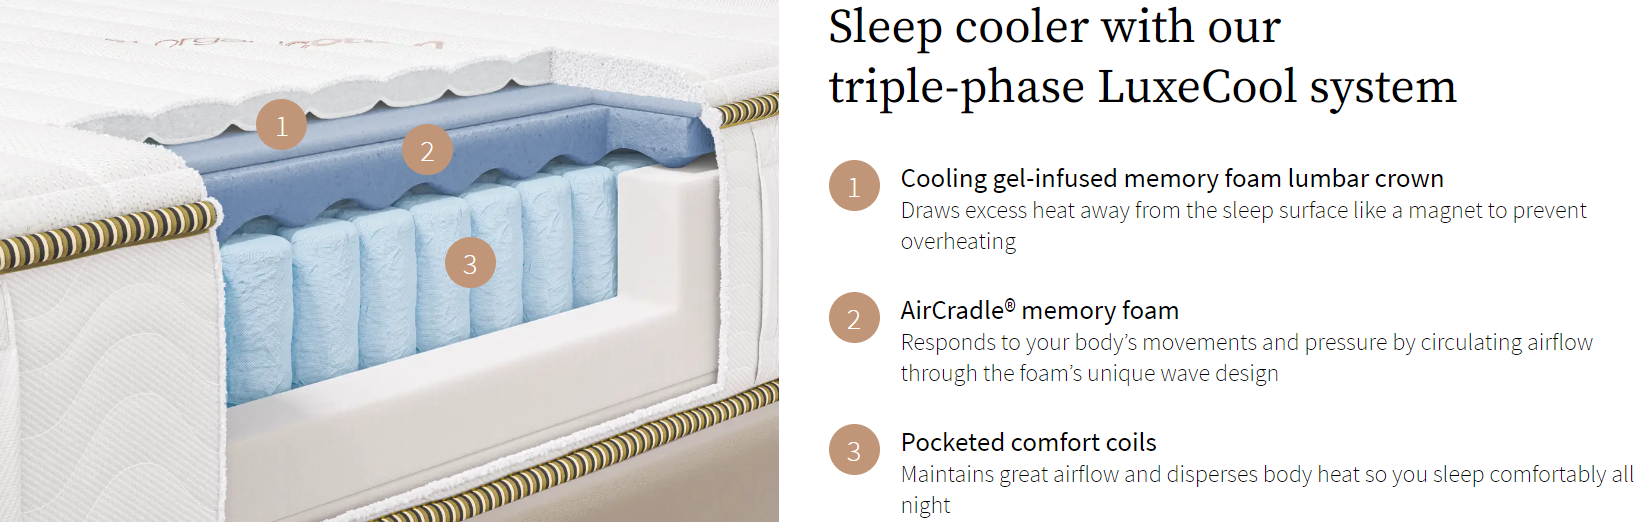 Sleep cooler with Saatva's triple-phase LuxeCool system, mattress construction